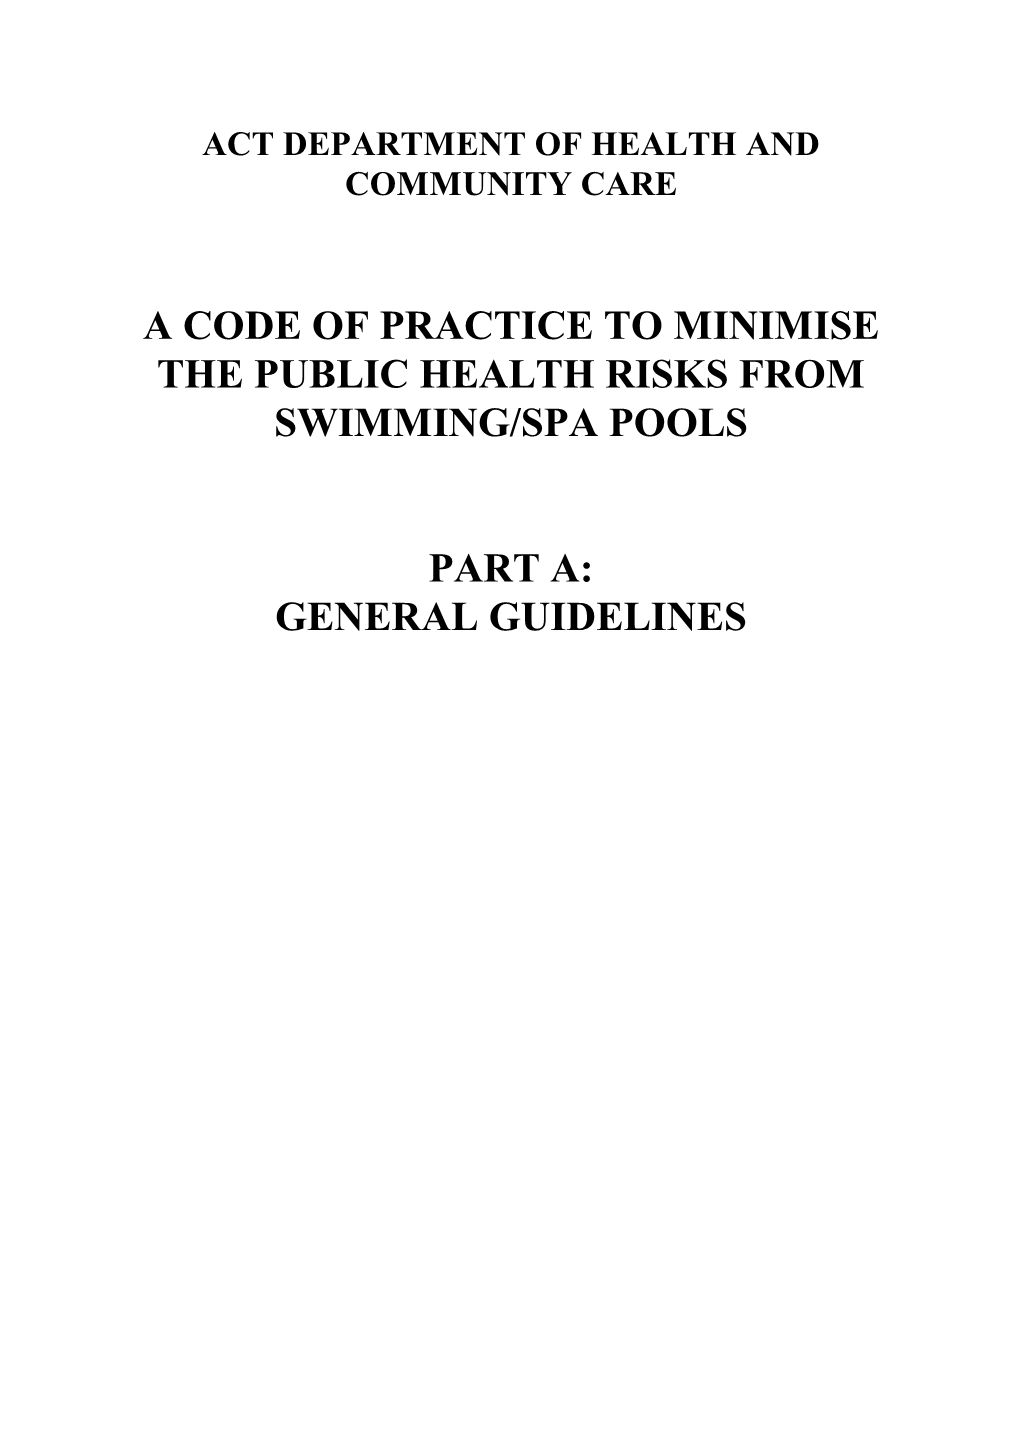 A Code of Practice to Minimise the Public Health Risks from Swimming/Spa Pools Part A